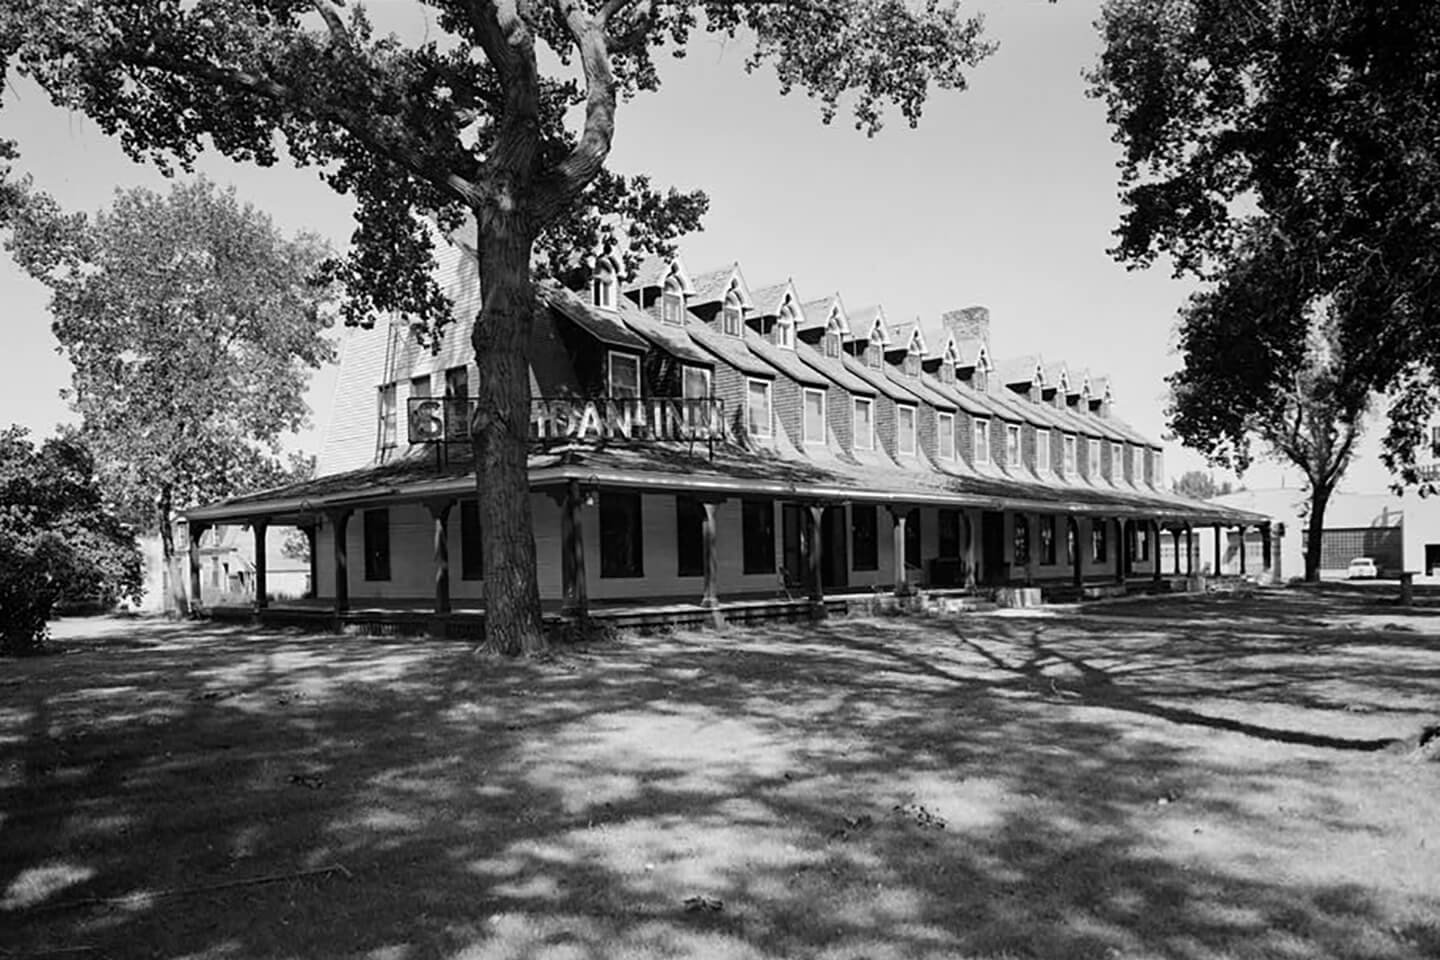 Historical photograph of Sheridan Inn's side view